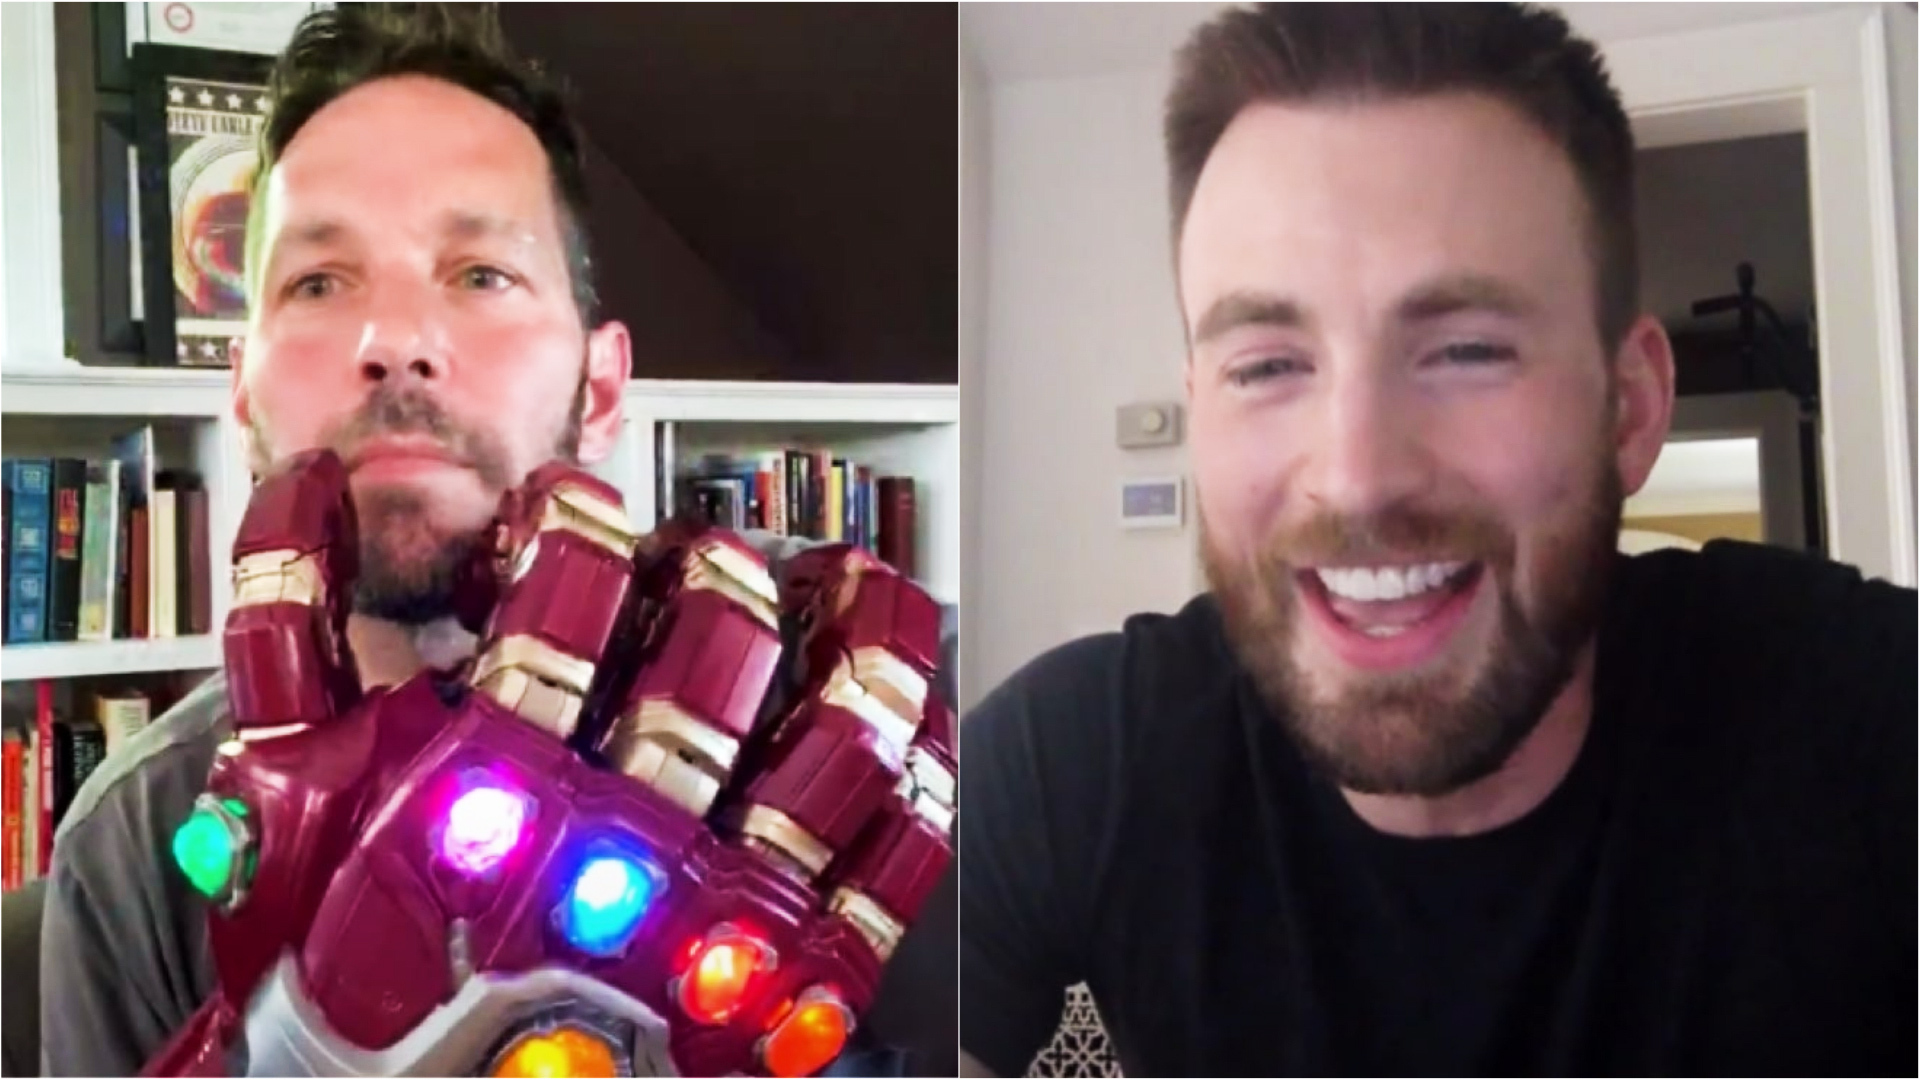 Marvel Actors Chris Evans and Paul Rudd Interview Each Other for Actor on Actors